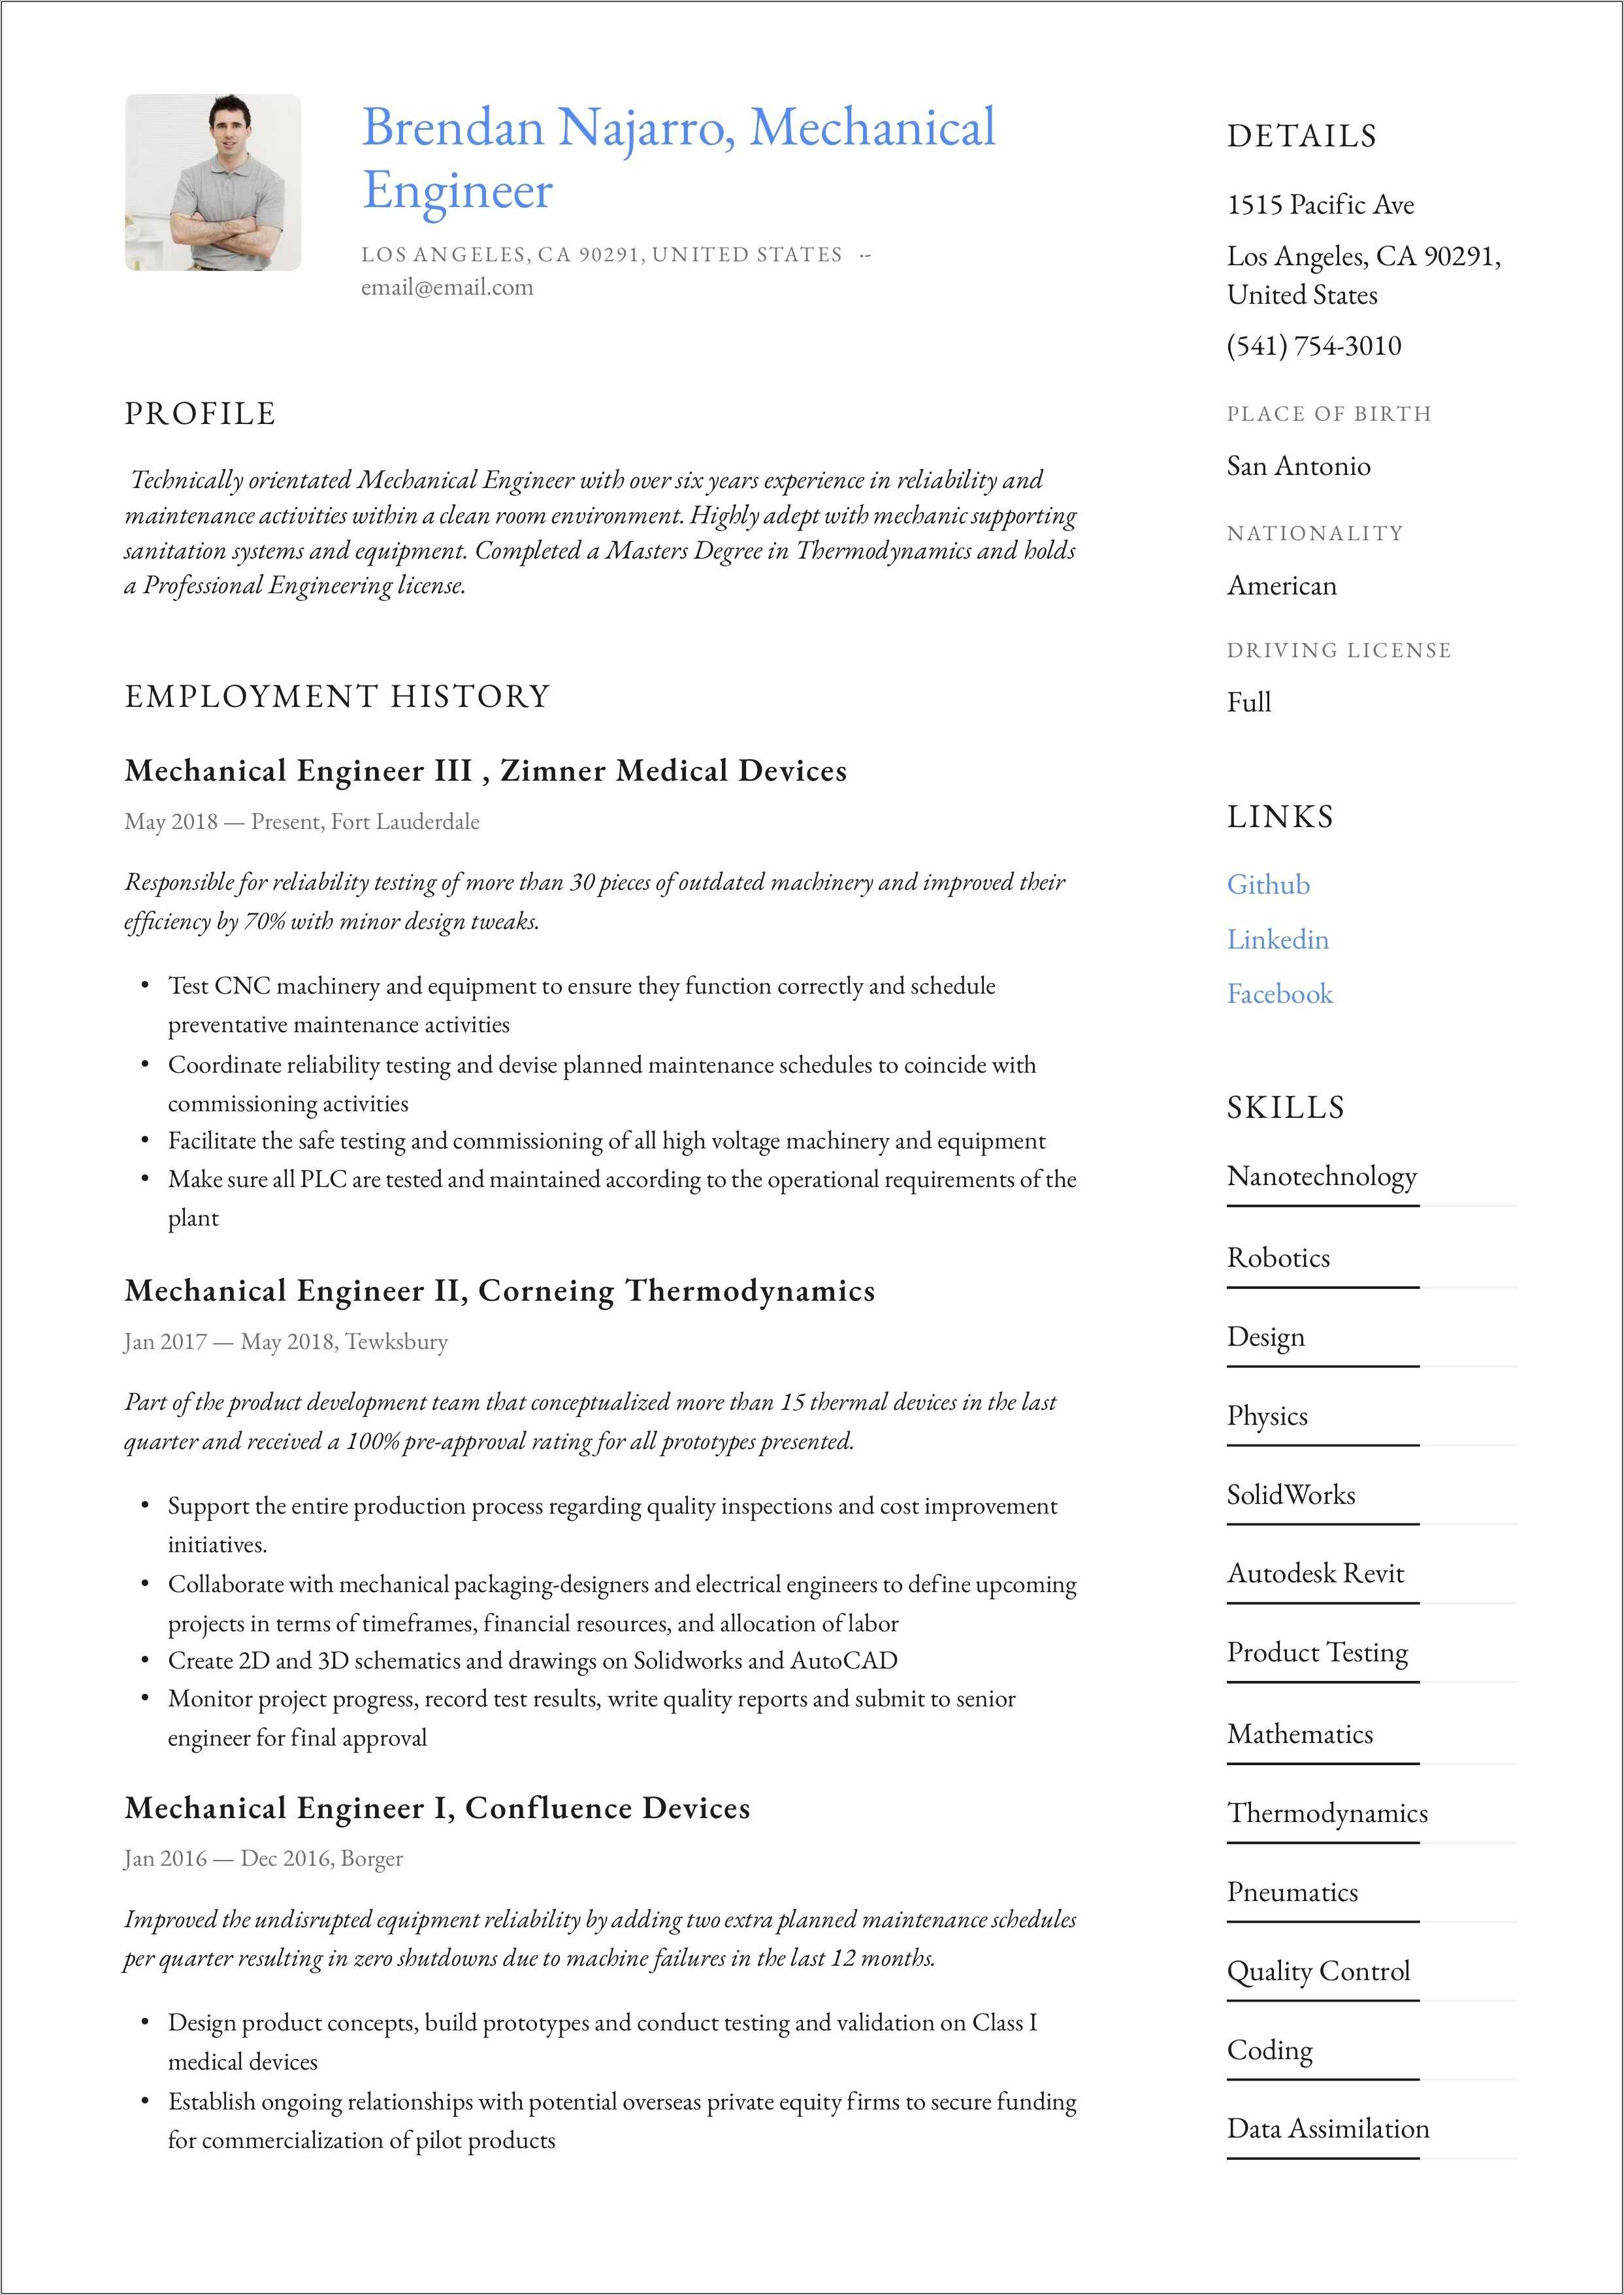 Short And Engaging Pitch About Yourself Resume Sample - Resume Example ...